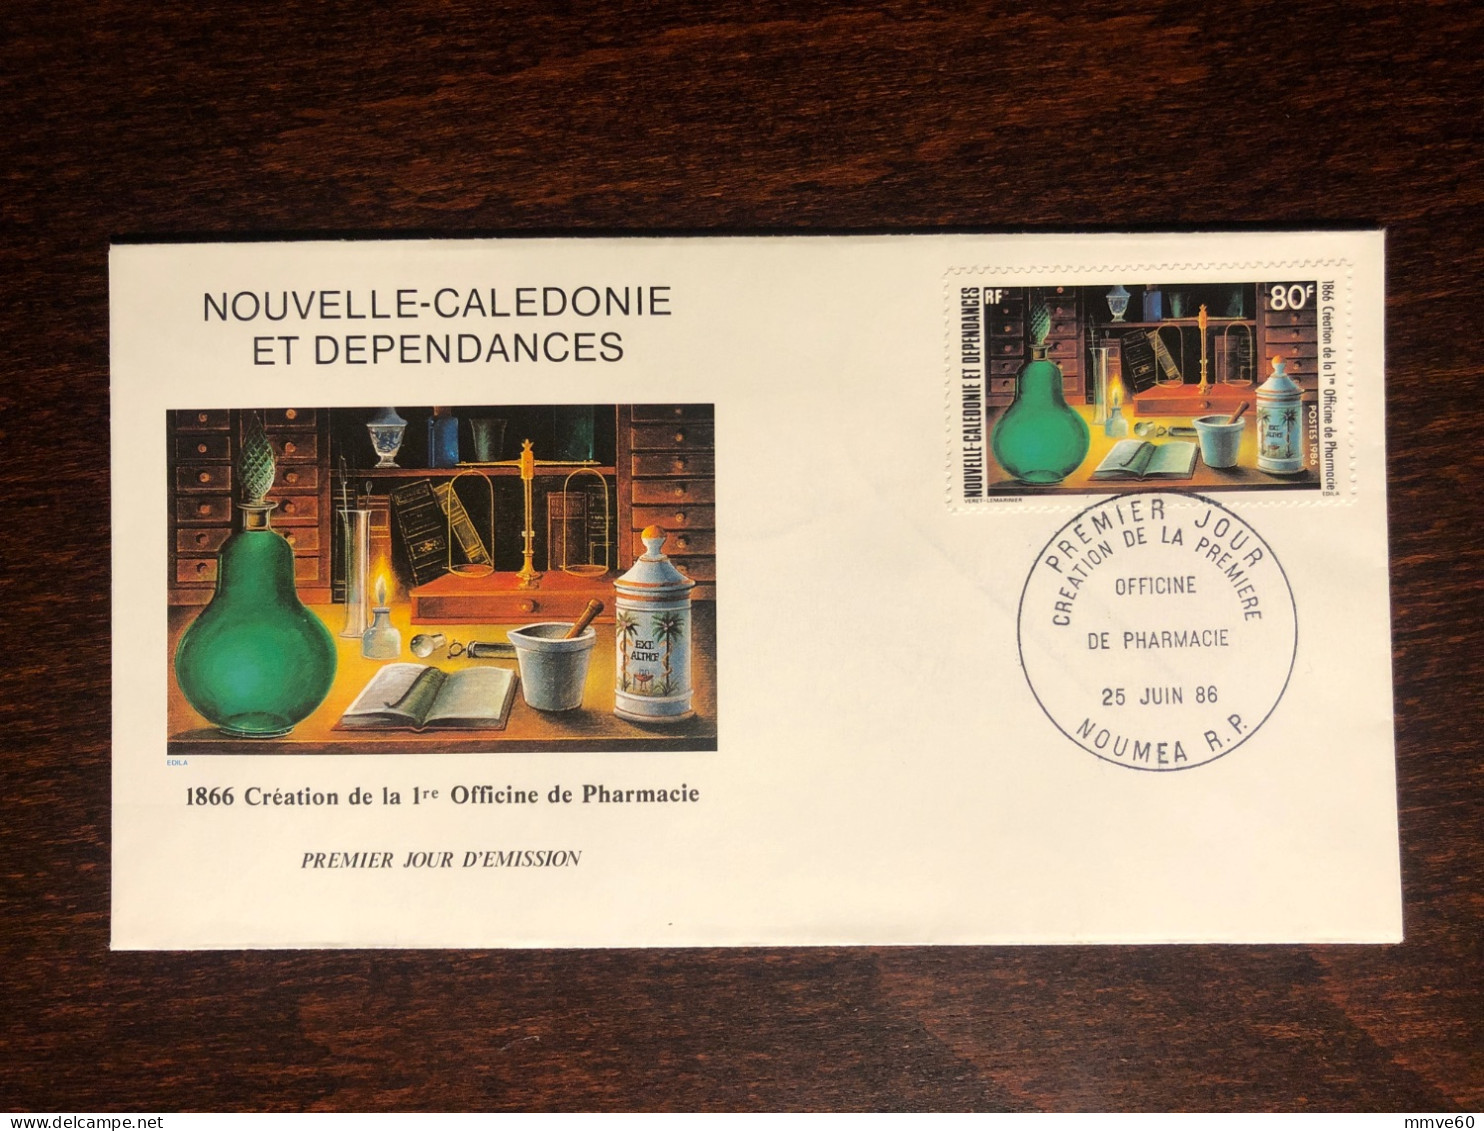 NEW CALEDONIA NOUVELLE CALEDONIE FDC COVER 1986 YEAR PHARMACY PHARMACEUTICAL HEALTH MEDICINE - Storia Postale